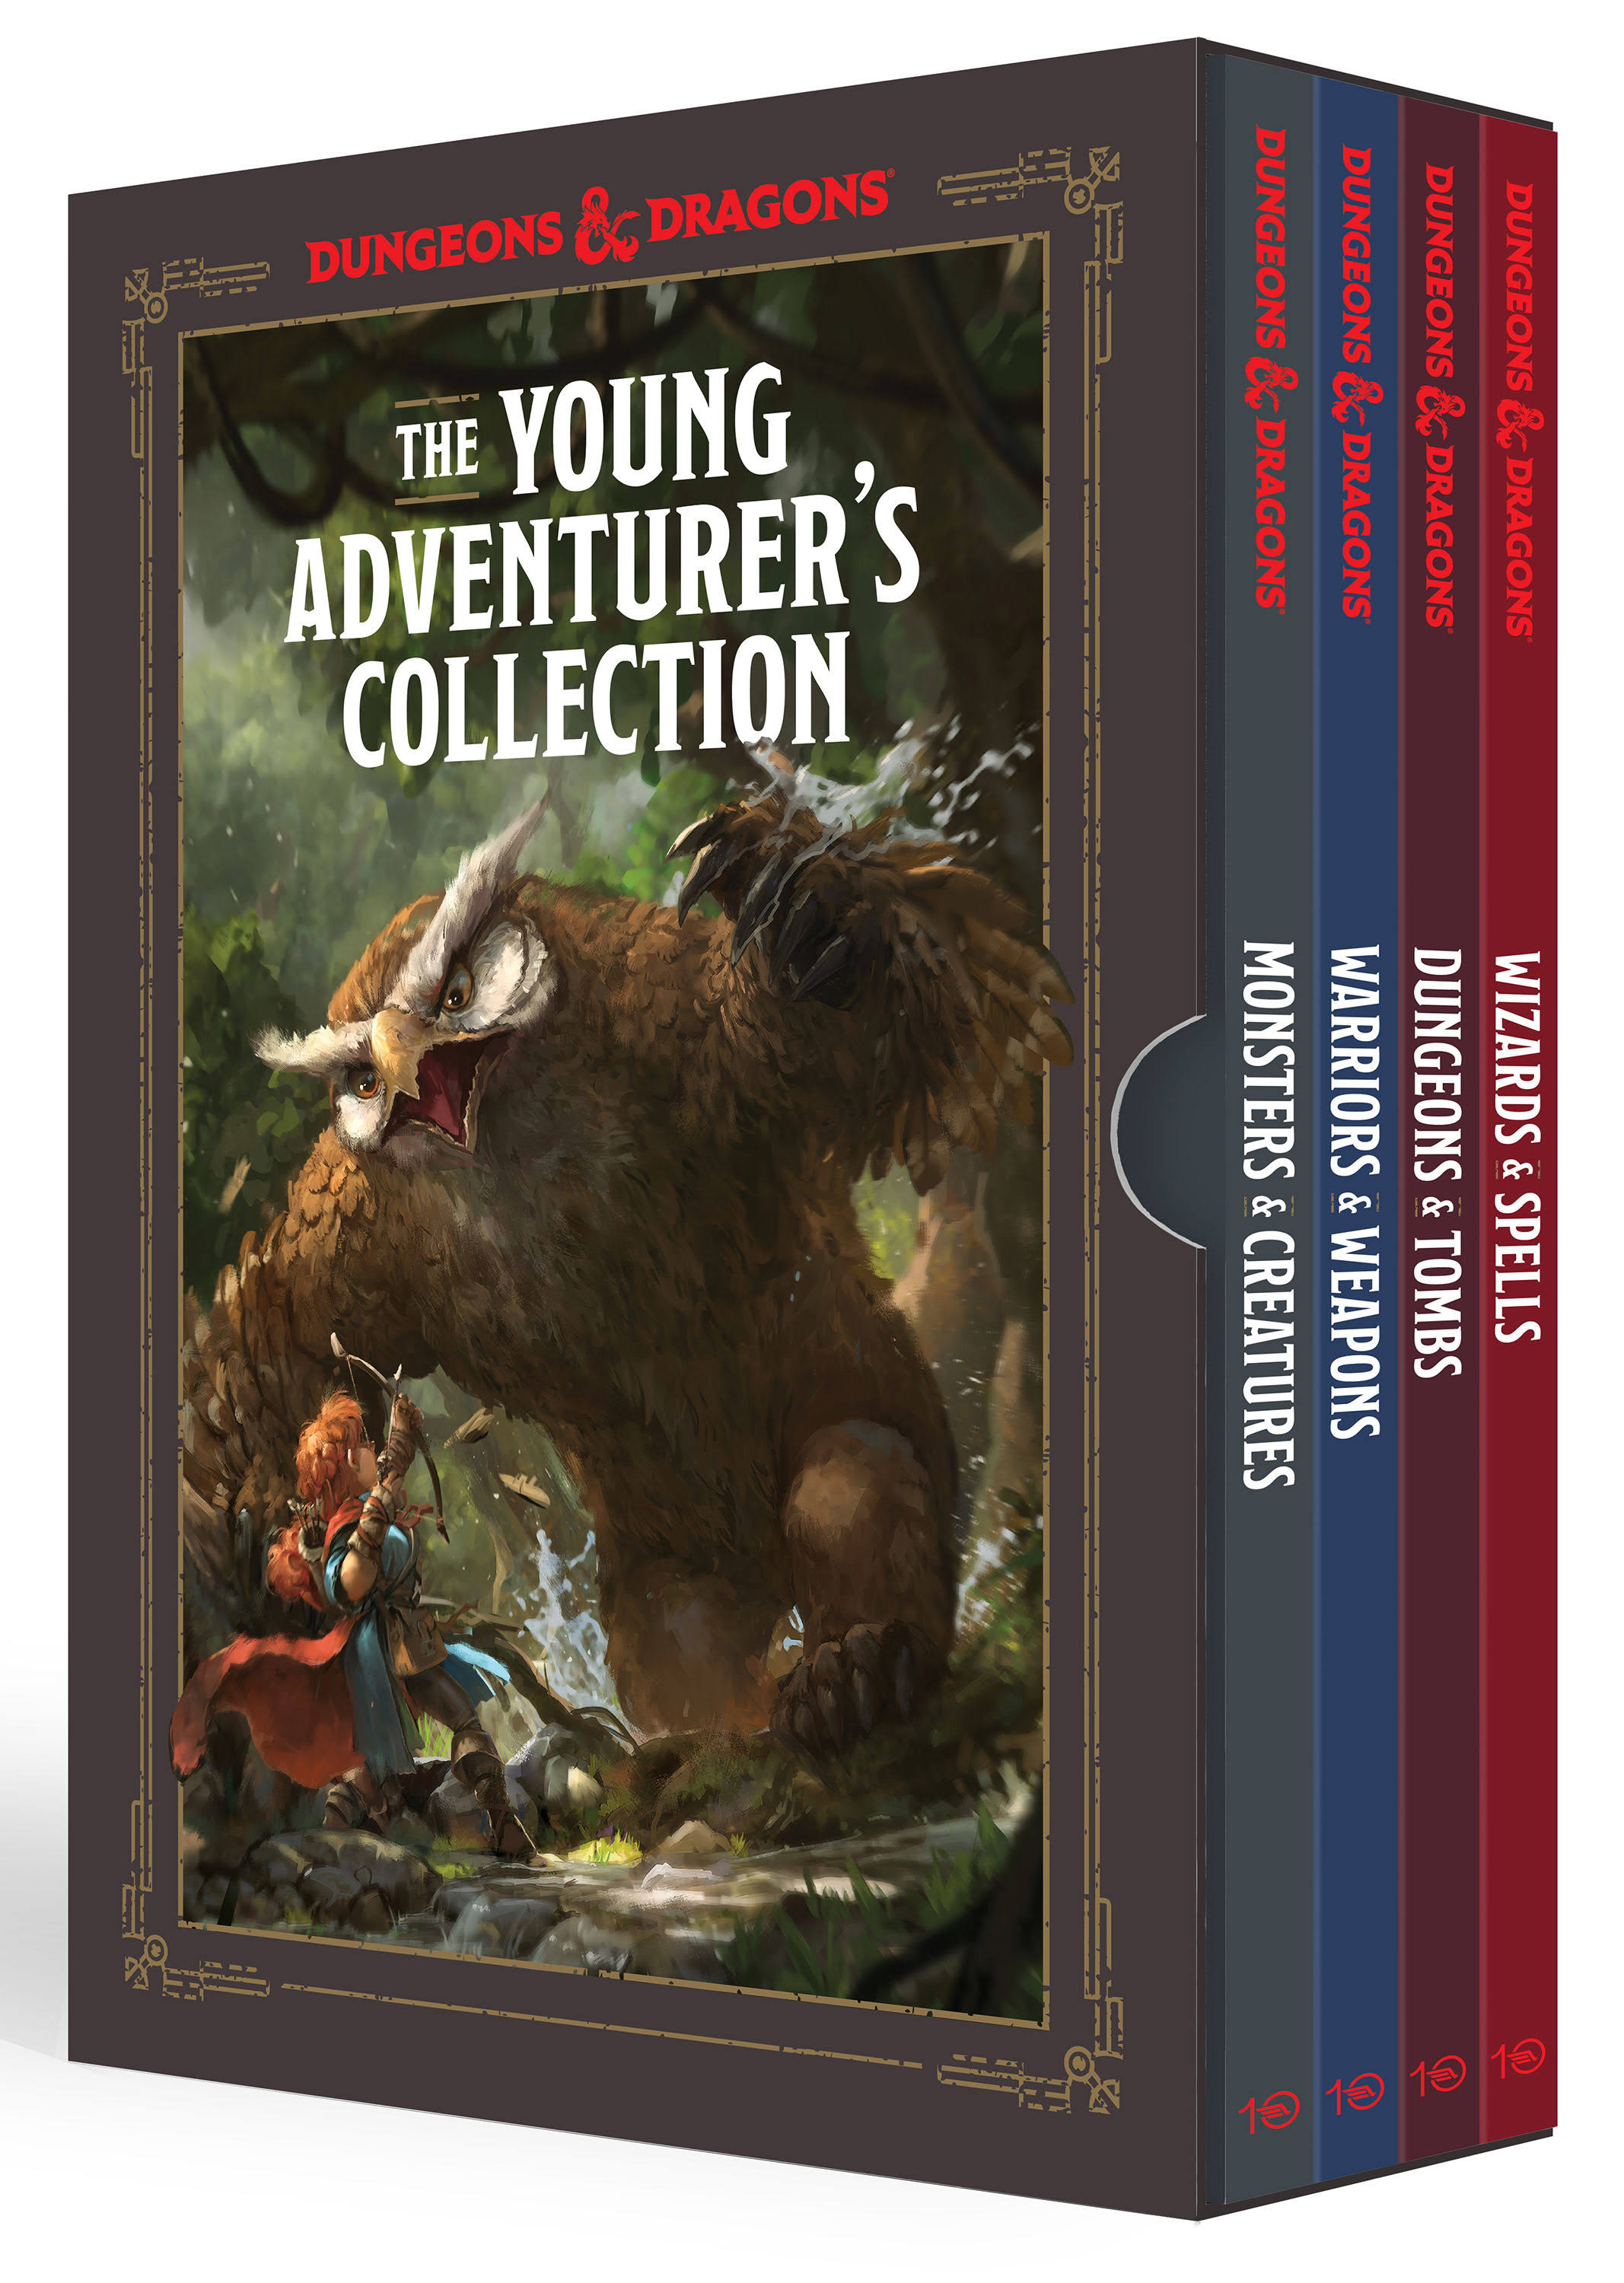 The Young Adventurer's Collection [Dungeons and Dragons 4-Book Boxed Set]: Monsters and Creatures, Warriors and Weapons, Dungeons and Tombs, and Wizards and Spells